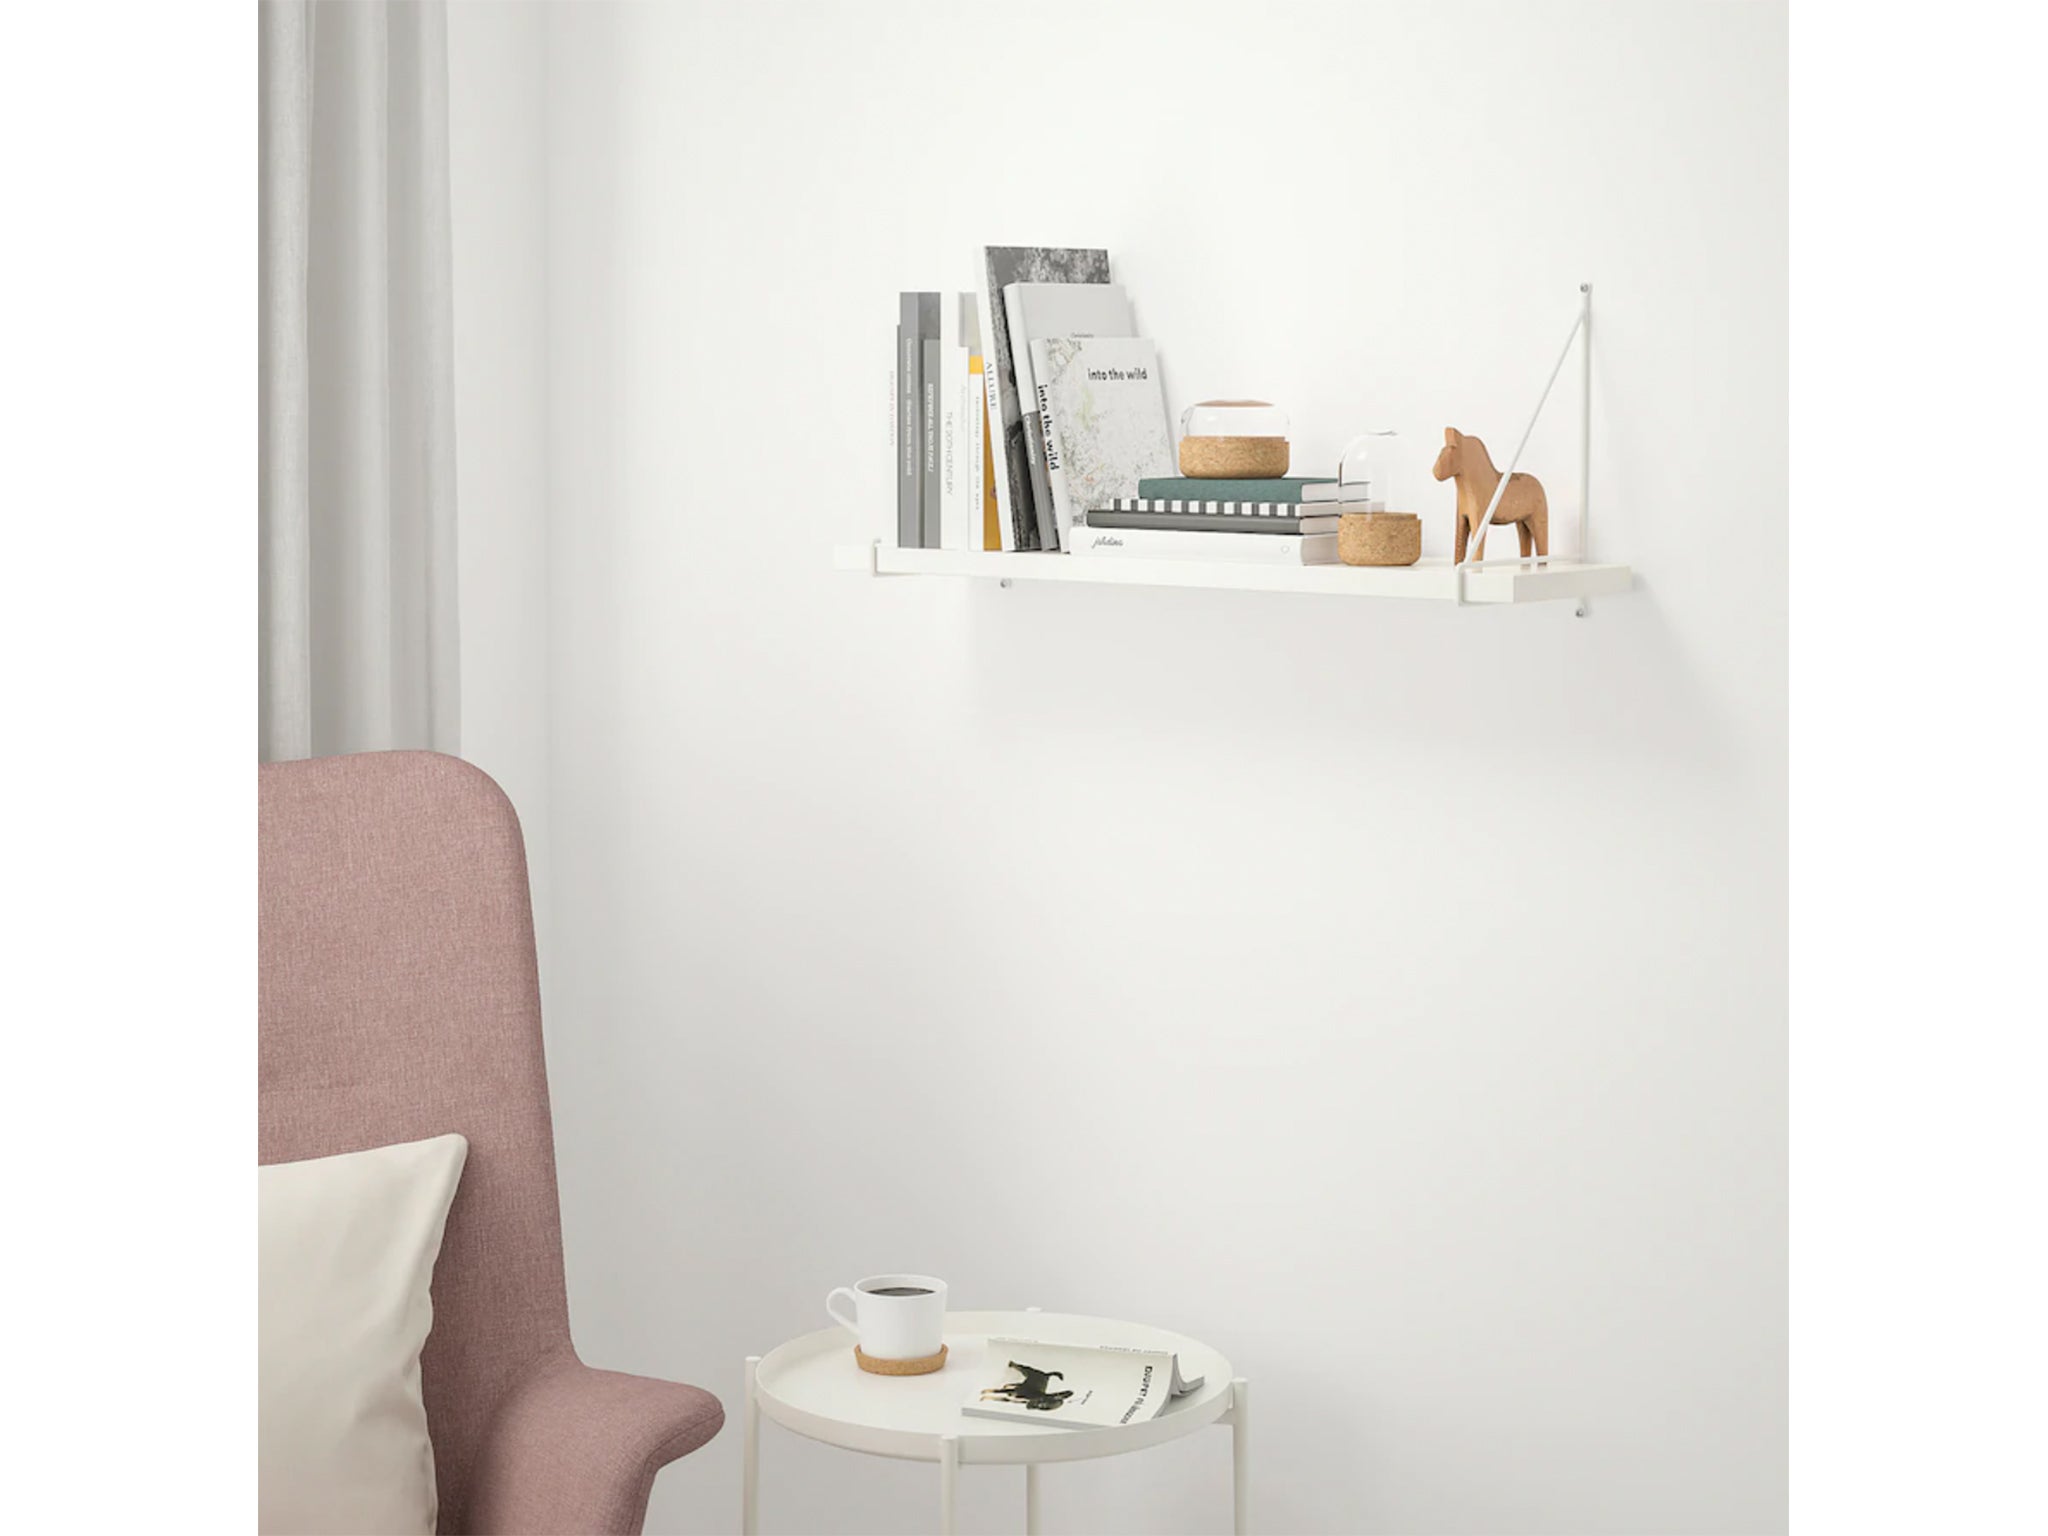 Whether you're storing books, decorative accessories or work documents, this shelf can hold up to 10kg of stuff and look good at the same time (Ikea)